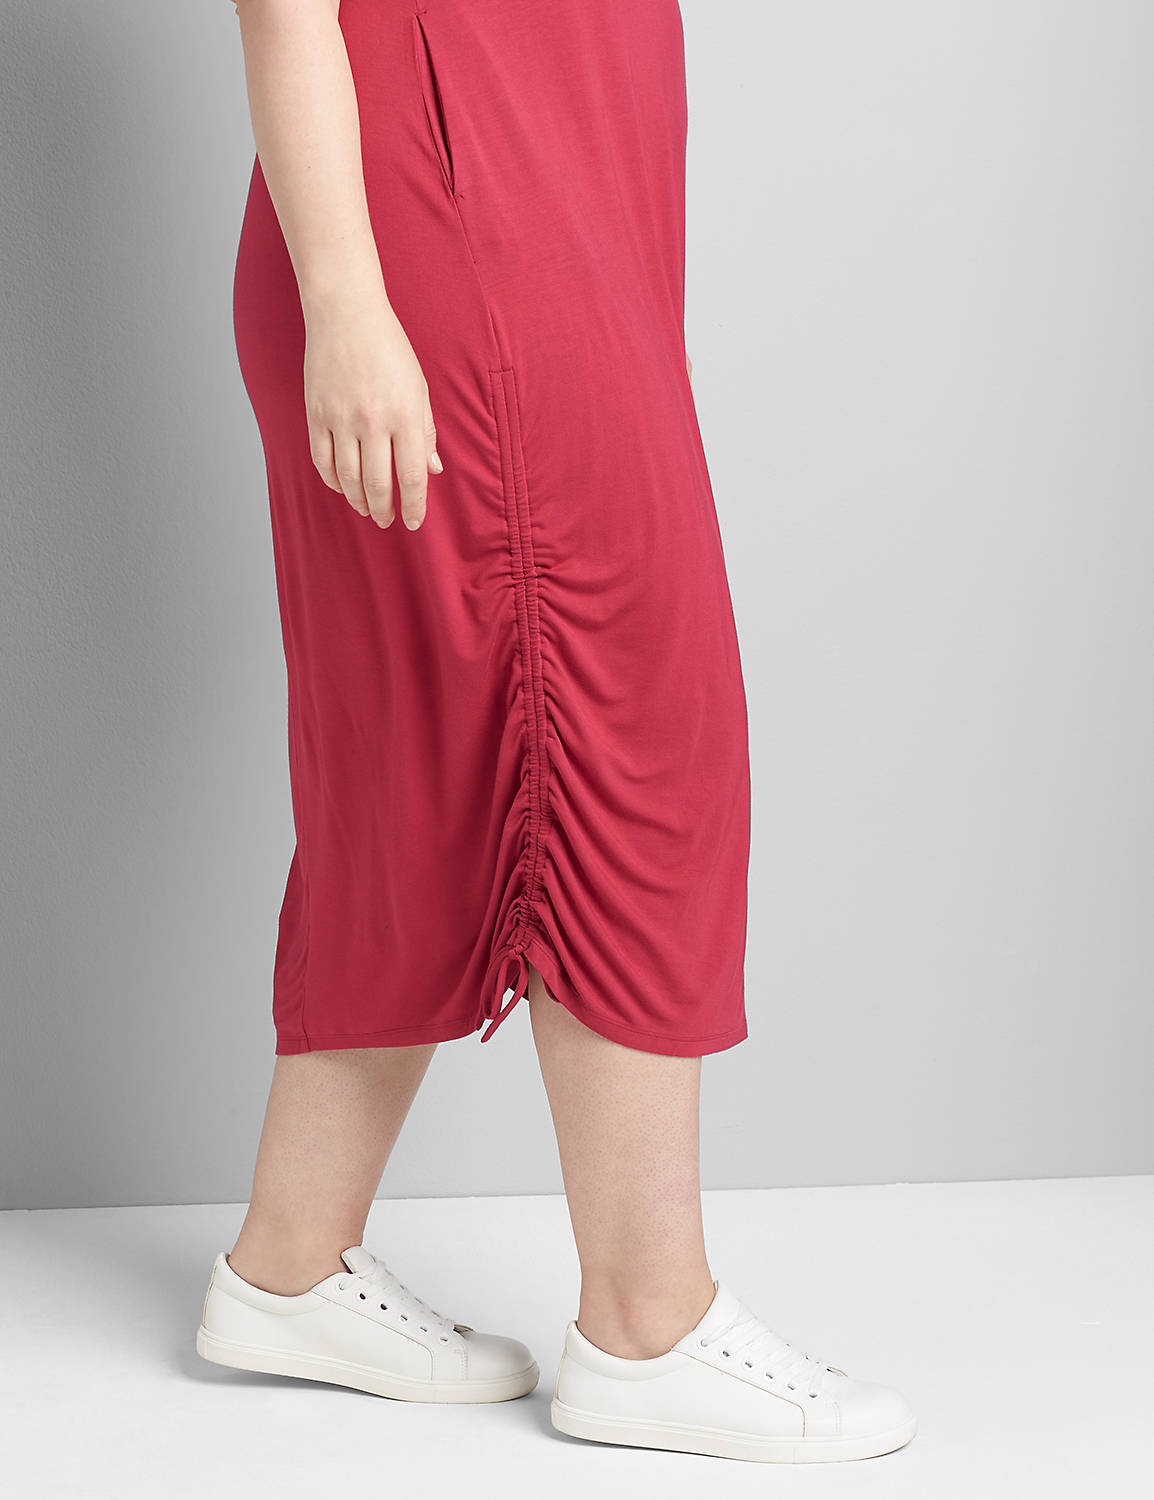 Ruched Side Midi Dress Product Image 3